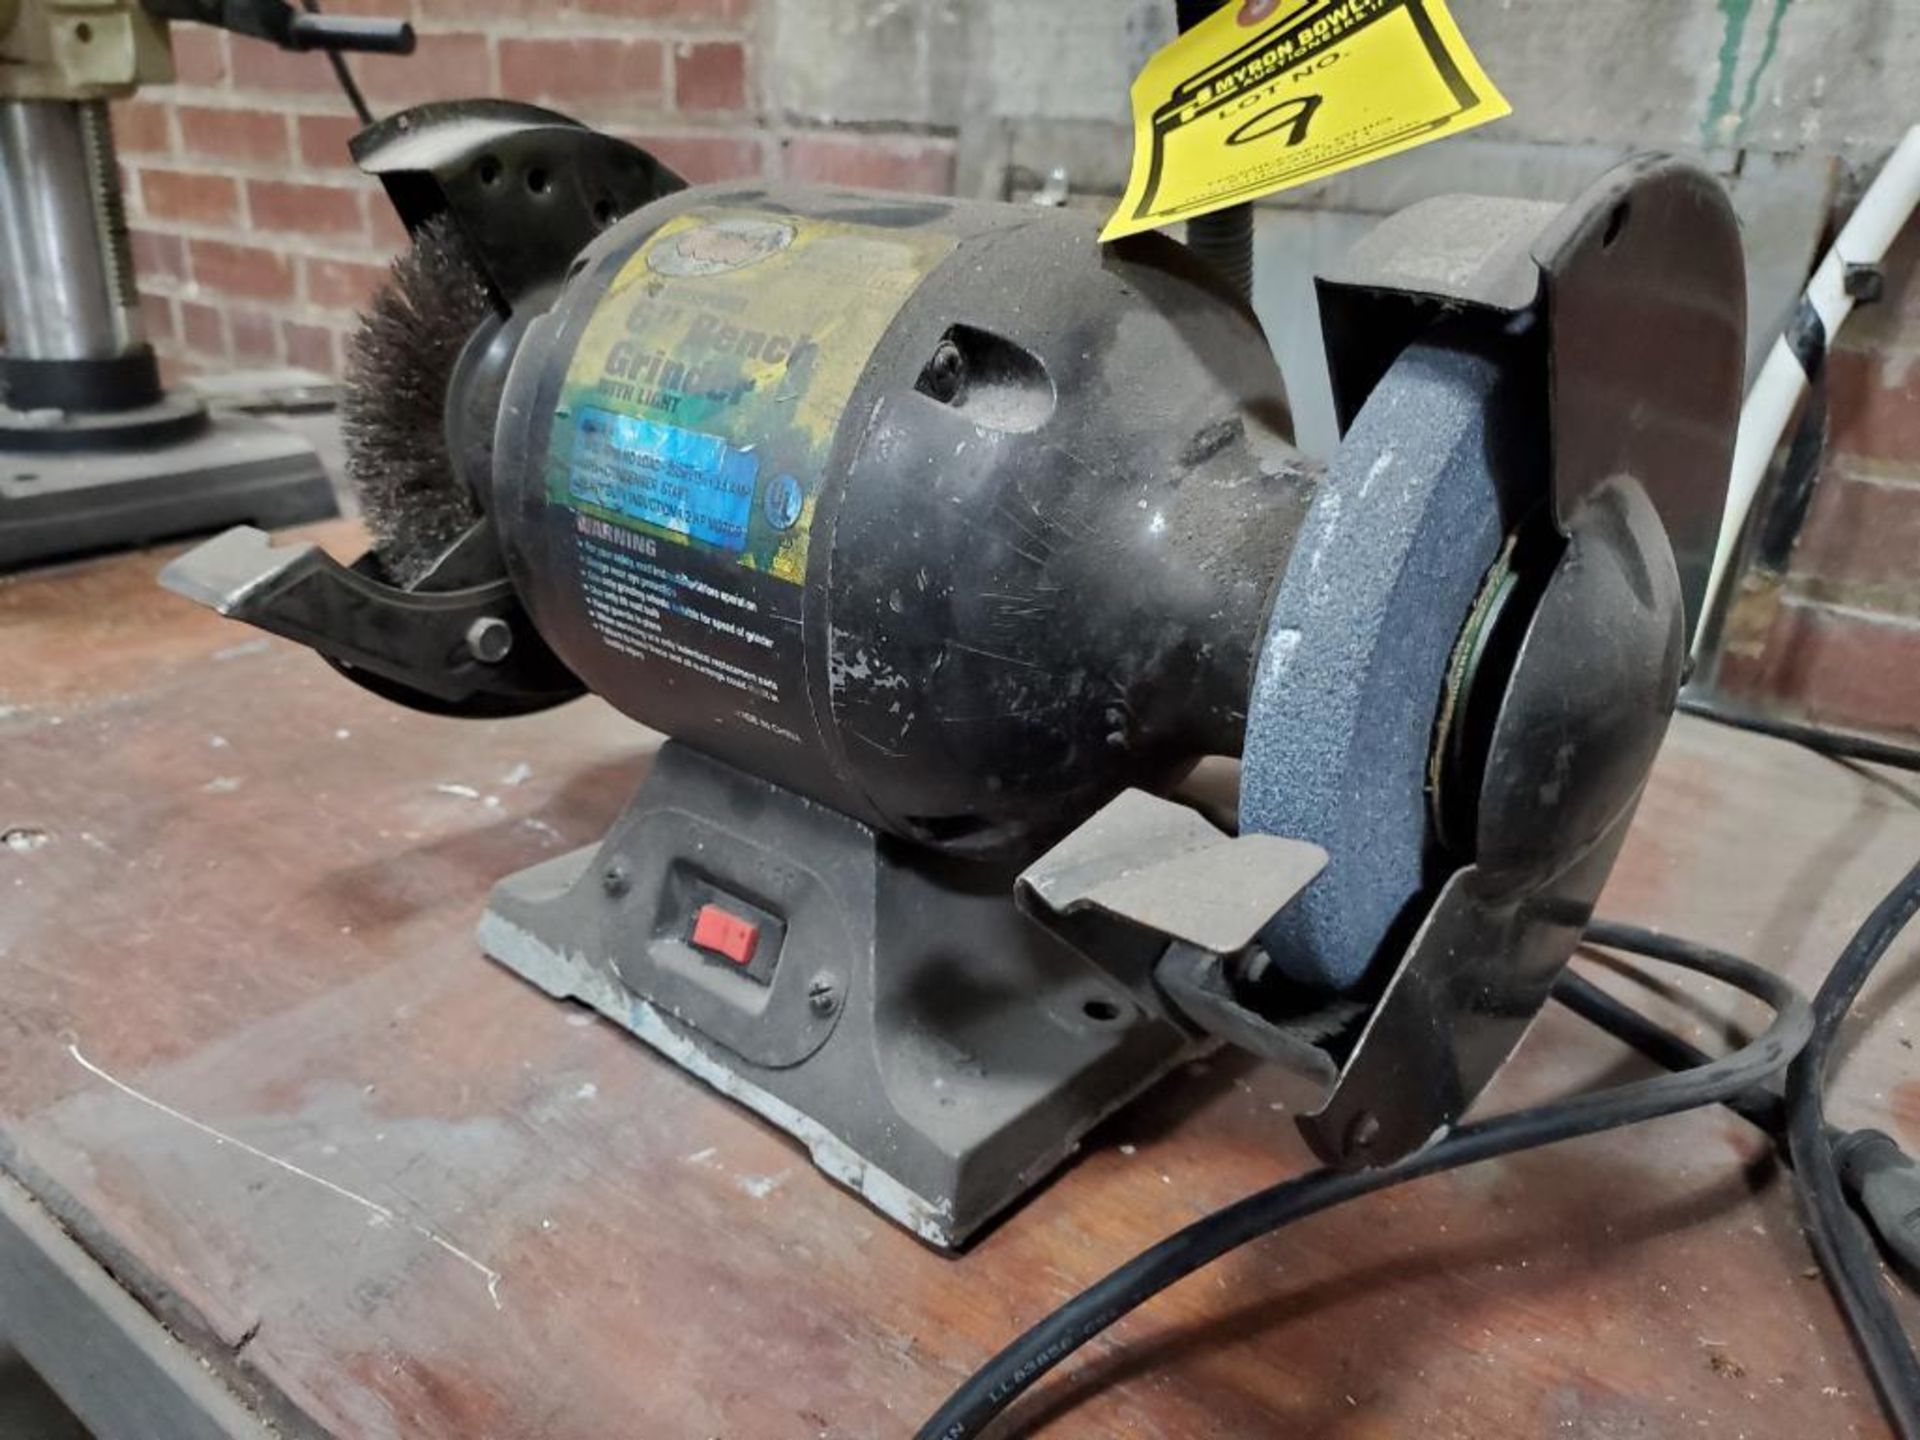 Collins 6" Double End Bench Grinder w/ Light - Image 2 of 3